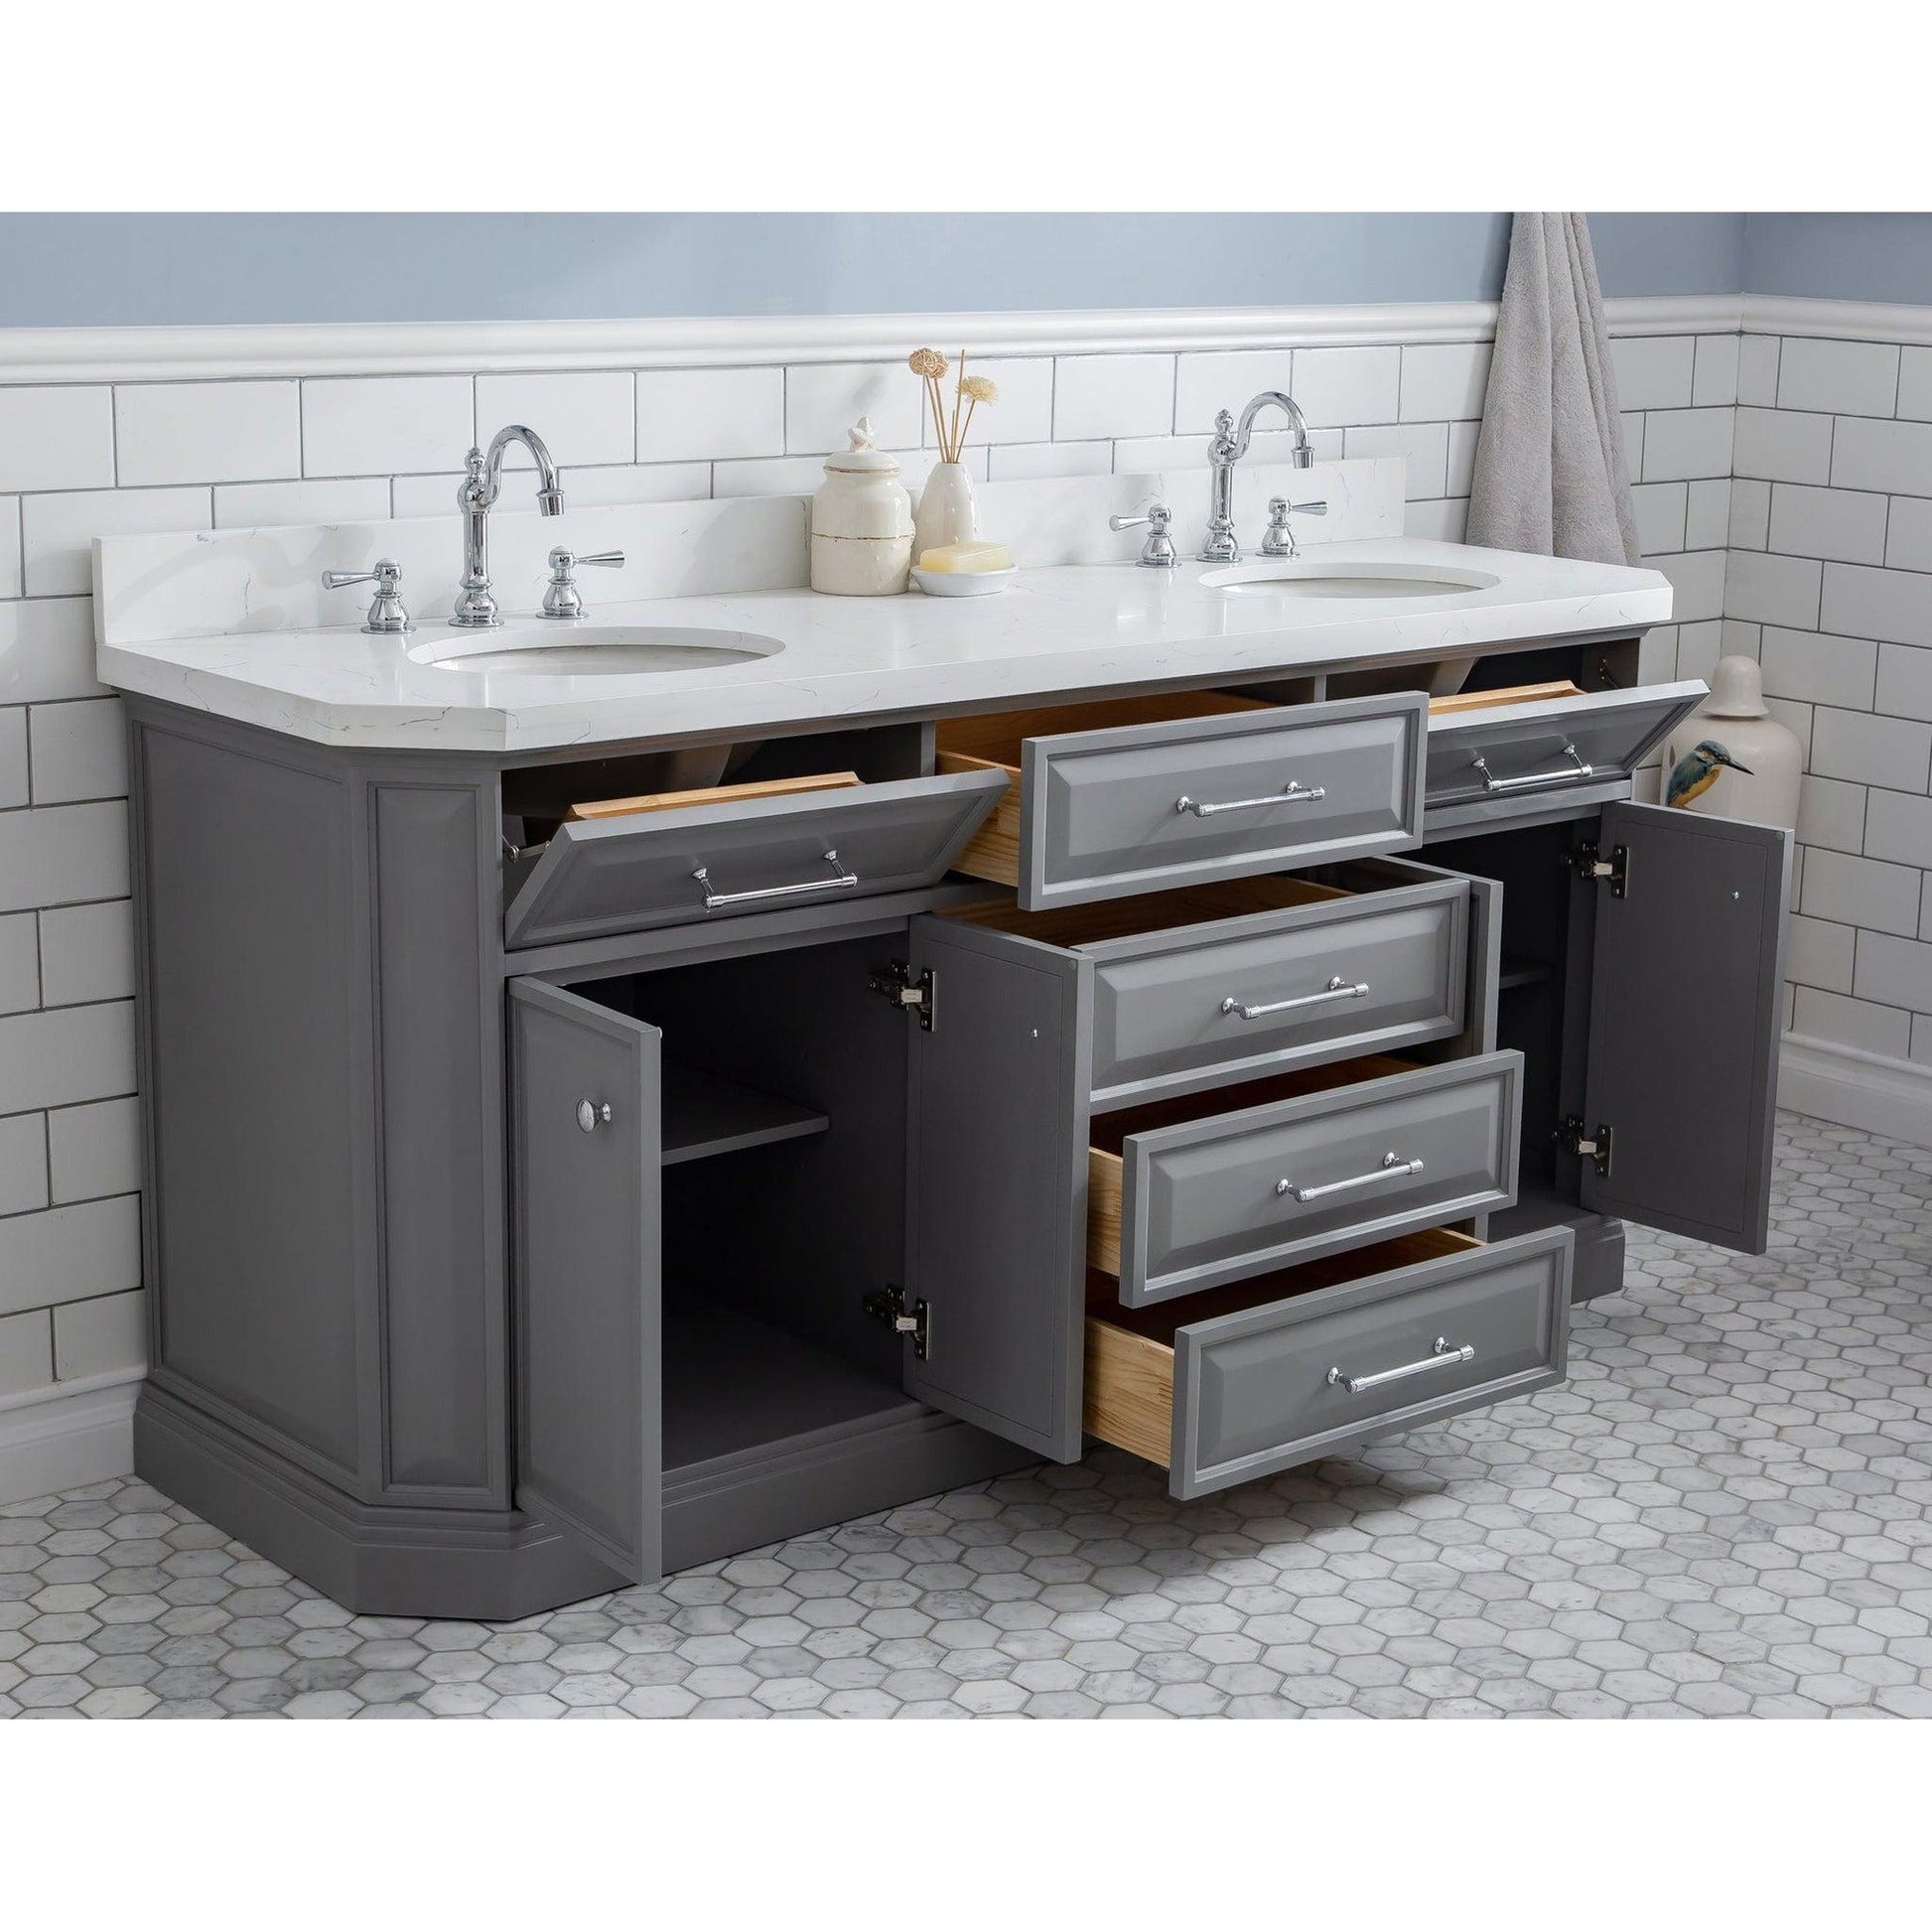 Water Creation Palace 72" Quartz Carrara Cashmere Grey Bathroom Vanity Set With Hardware And F2-0012 Faucets, Mirror in Chrome Finish